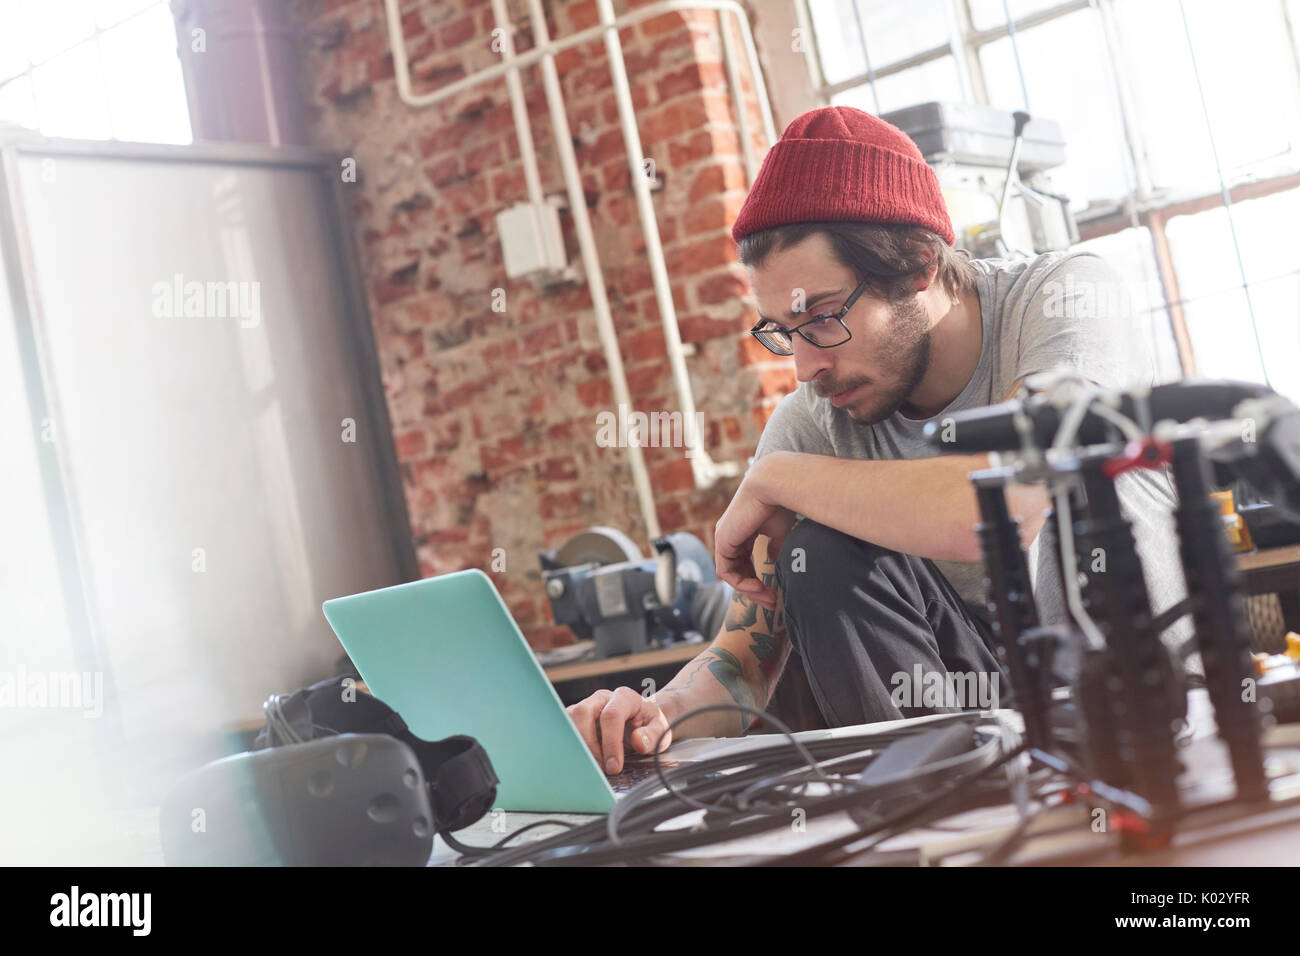 Male computer programmer working at laptop in workshop Stock Photo